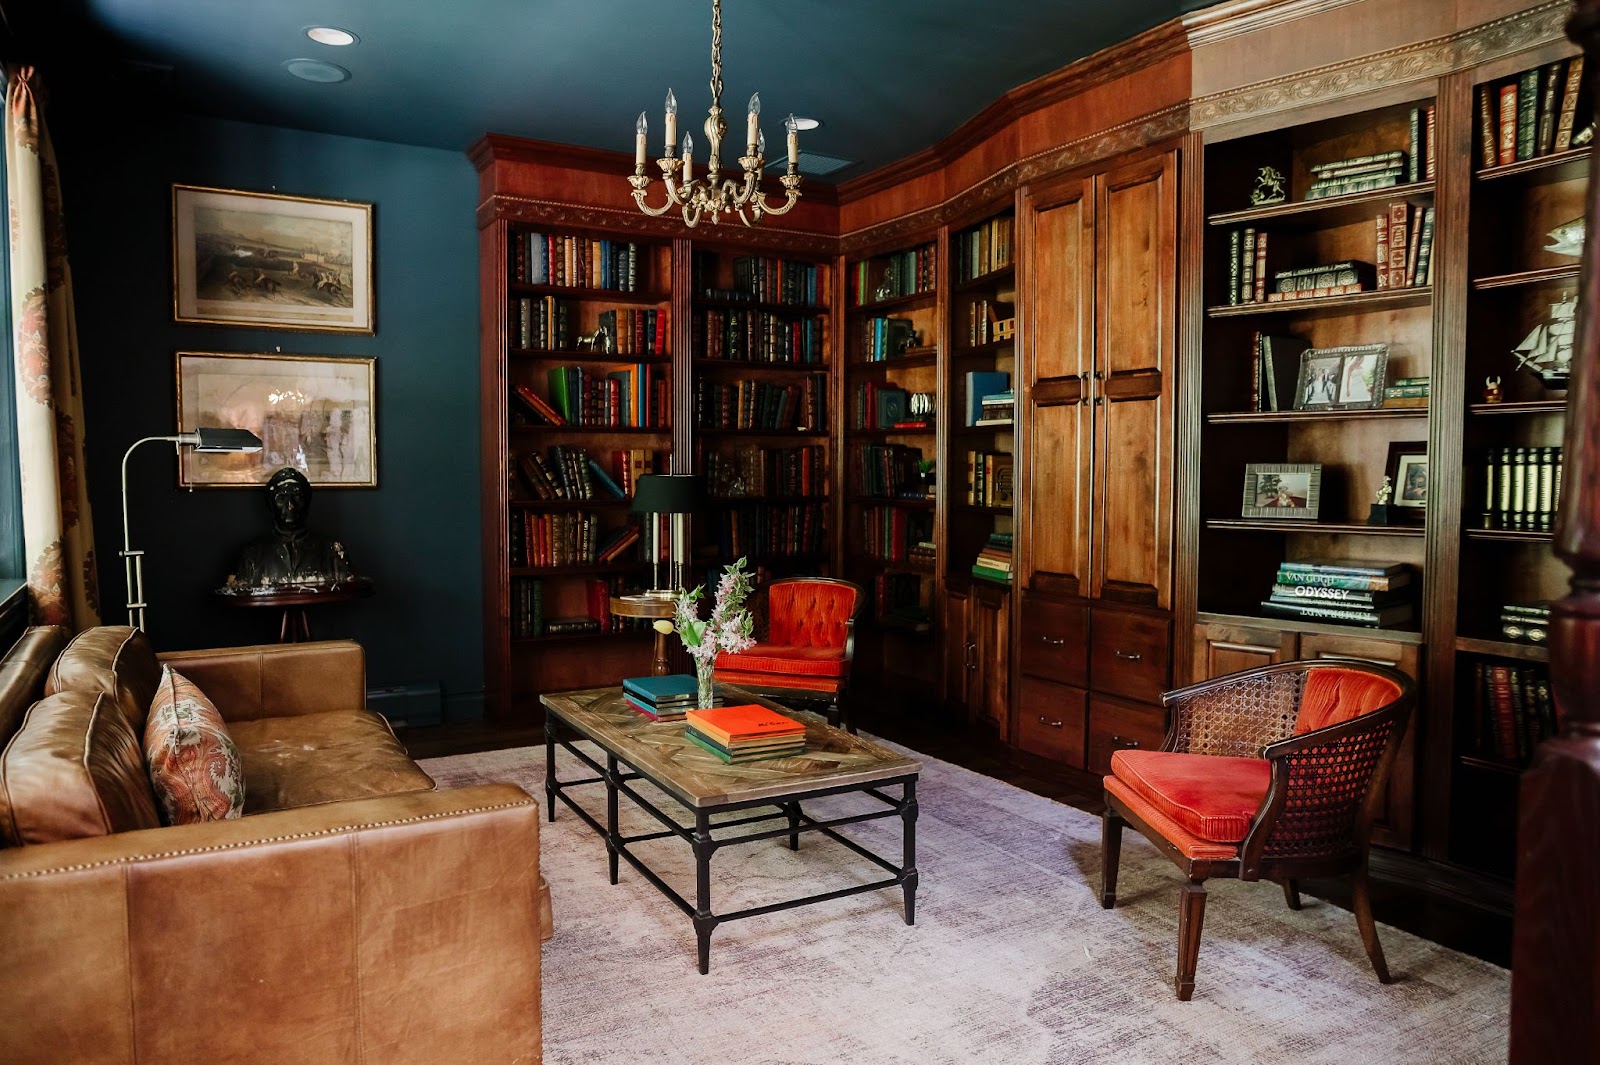 This library features built-in stained-wood shelving, a warm brown leather sofa and several other pieces of furniture and wall art on walls in dark, rich blue.